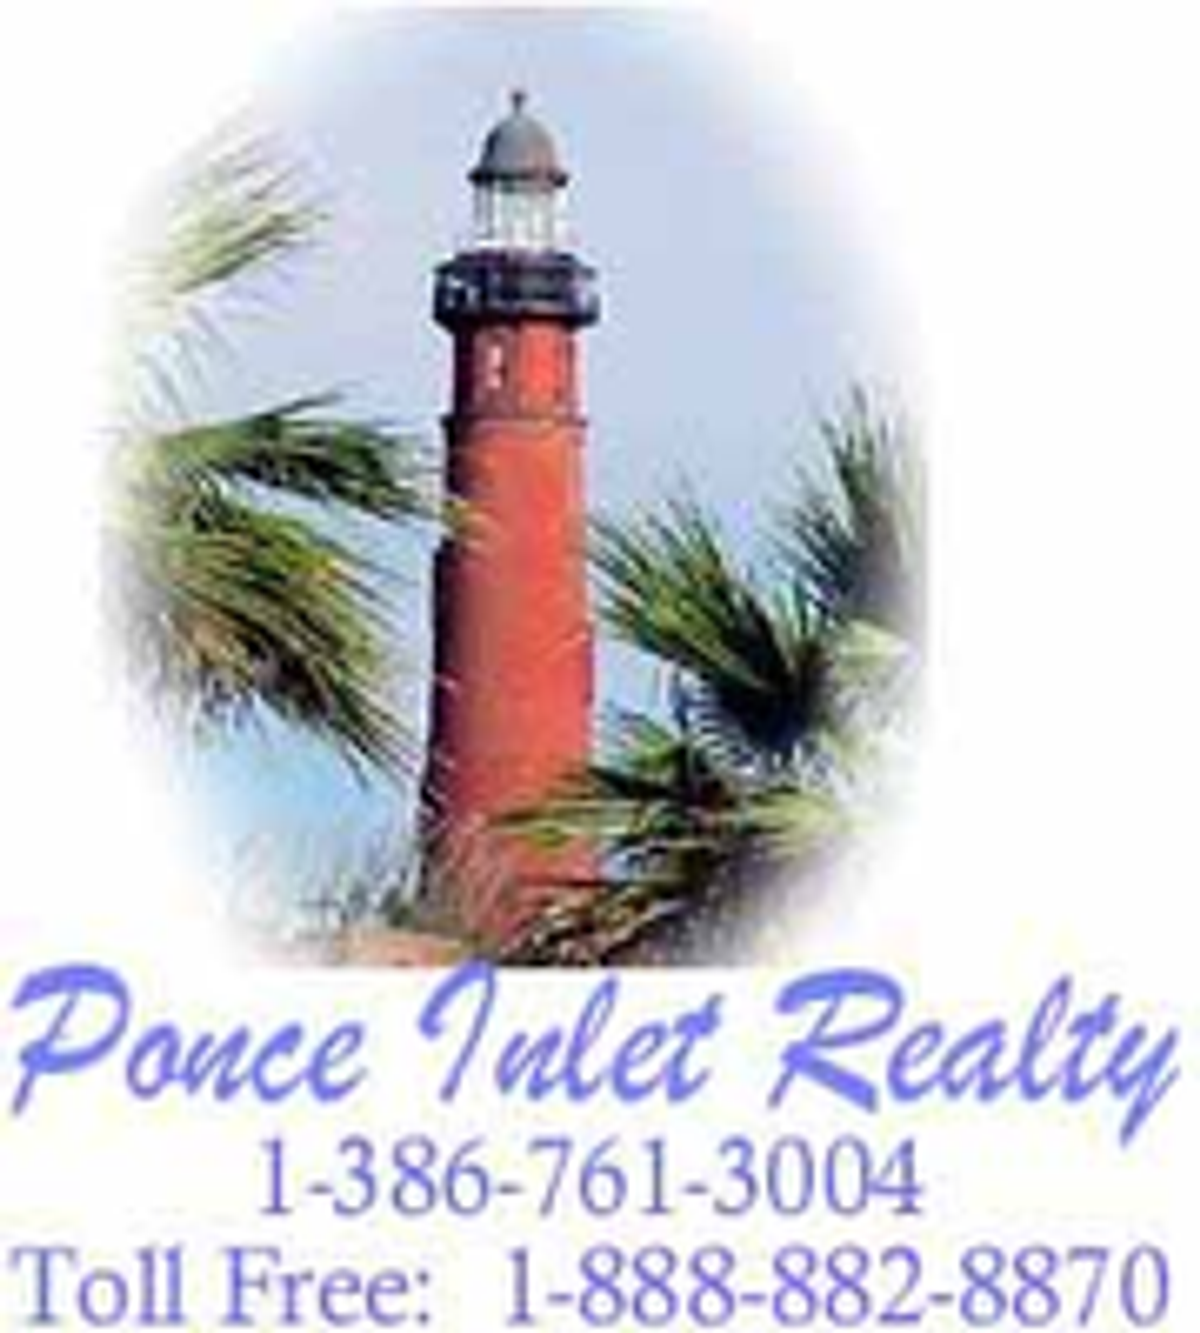 Photo for Leslie Collins, Listing Agent at Ponce Inlet Realty, Inc